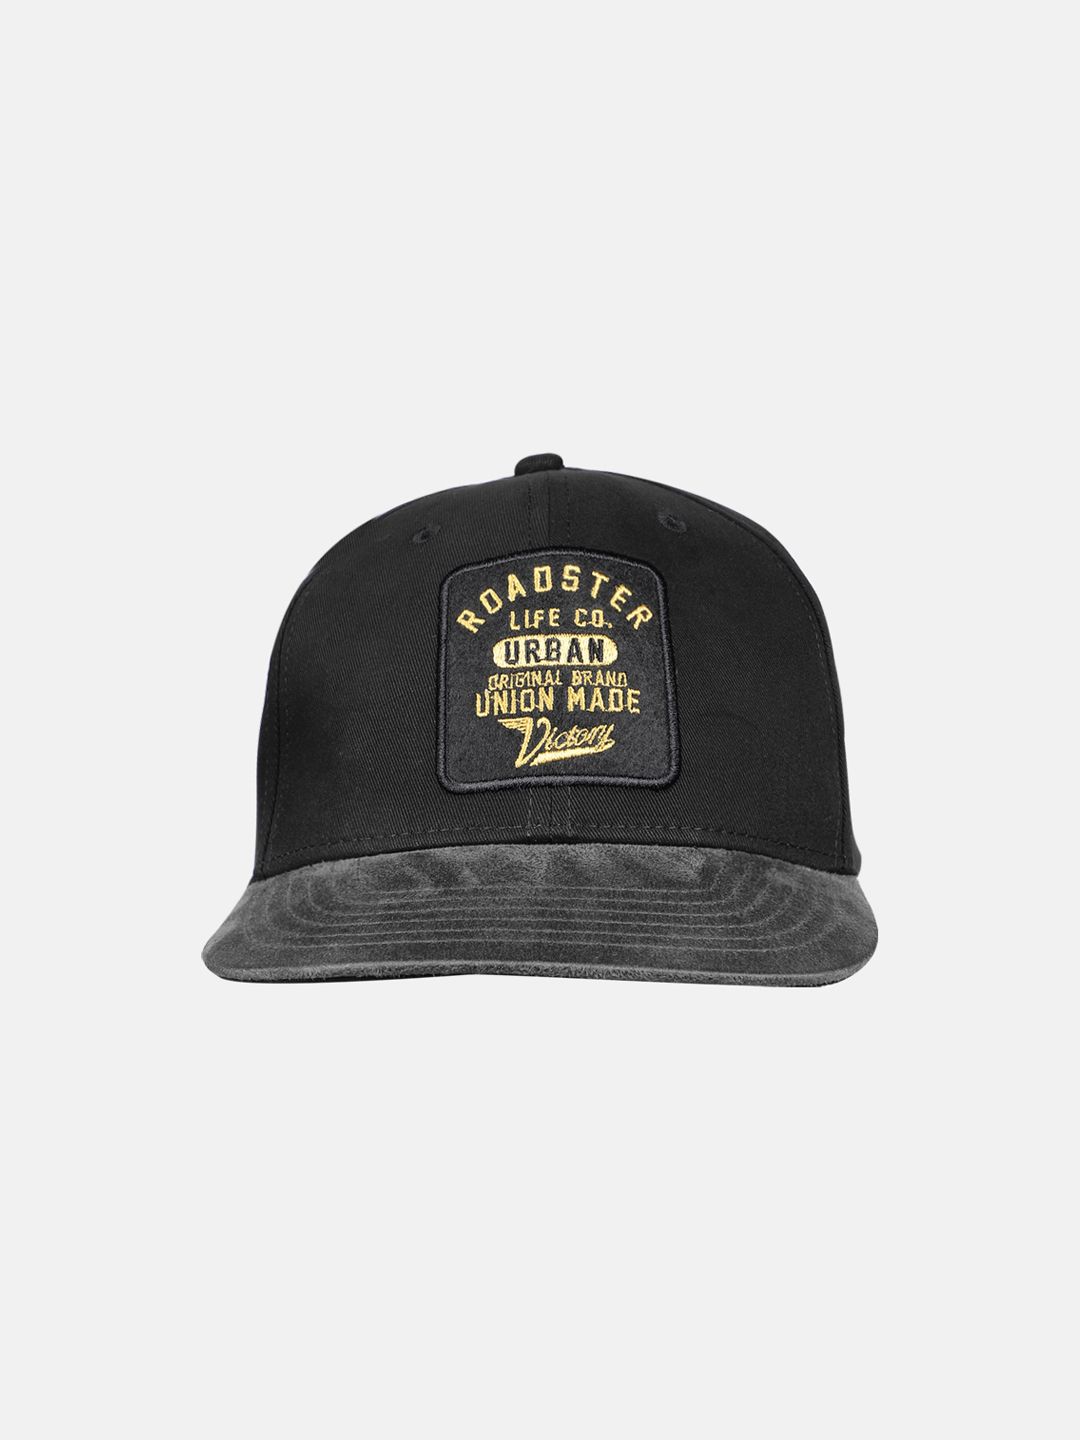 Roadster Unisex Black Embroidered Snapback Cap Price in India